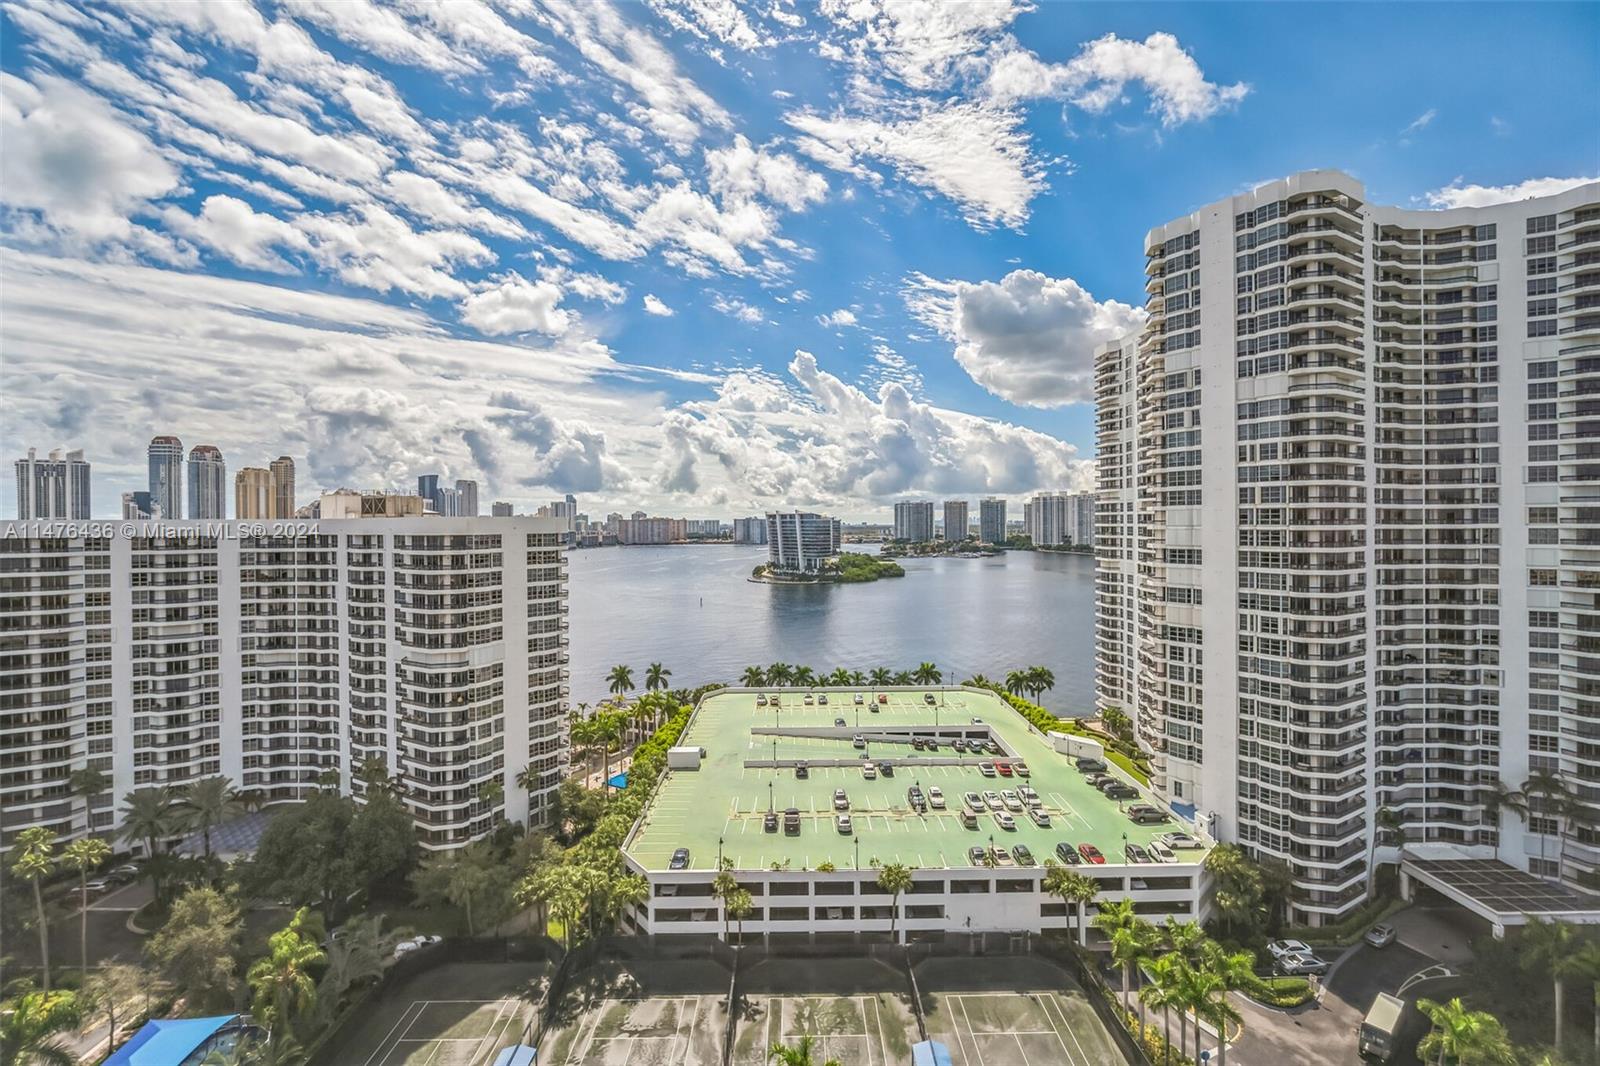 Mystic Pointe - Tower 400 / Aventura / 3 Beds, 3 Baths / 1,714 sq. ft. of living area / Fully remodeled and very well decorated high rise unit / Ready to move-in! / Beautiful views of the intracoastal, golf course, ocean, sunset, and the city / Split floor plan / Finished closets in all bedrooms / Top of the line appliances / Separate laundry room / Mystic Pointe complex offers a full set of amenities including: gym, spa, pool, tennis courts, restaurant, and marina (docks are sold/rented separately) / Unit comes with 1 assigned parking / Walking distance to Aventura Mall, supermarkets, drug stores, restaurants, and a short drive to Sunny Isles Beach.